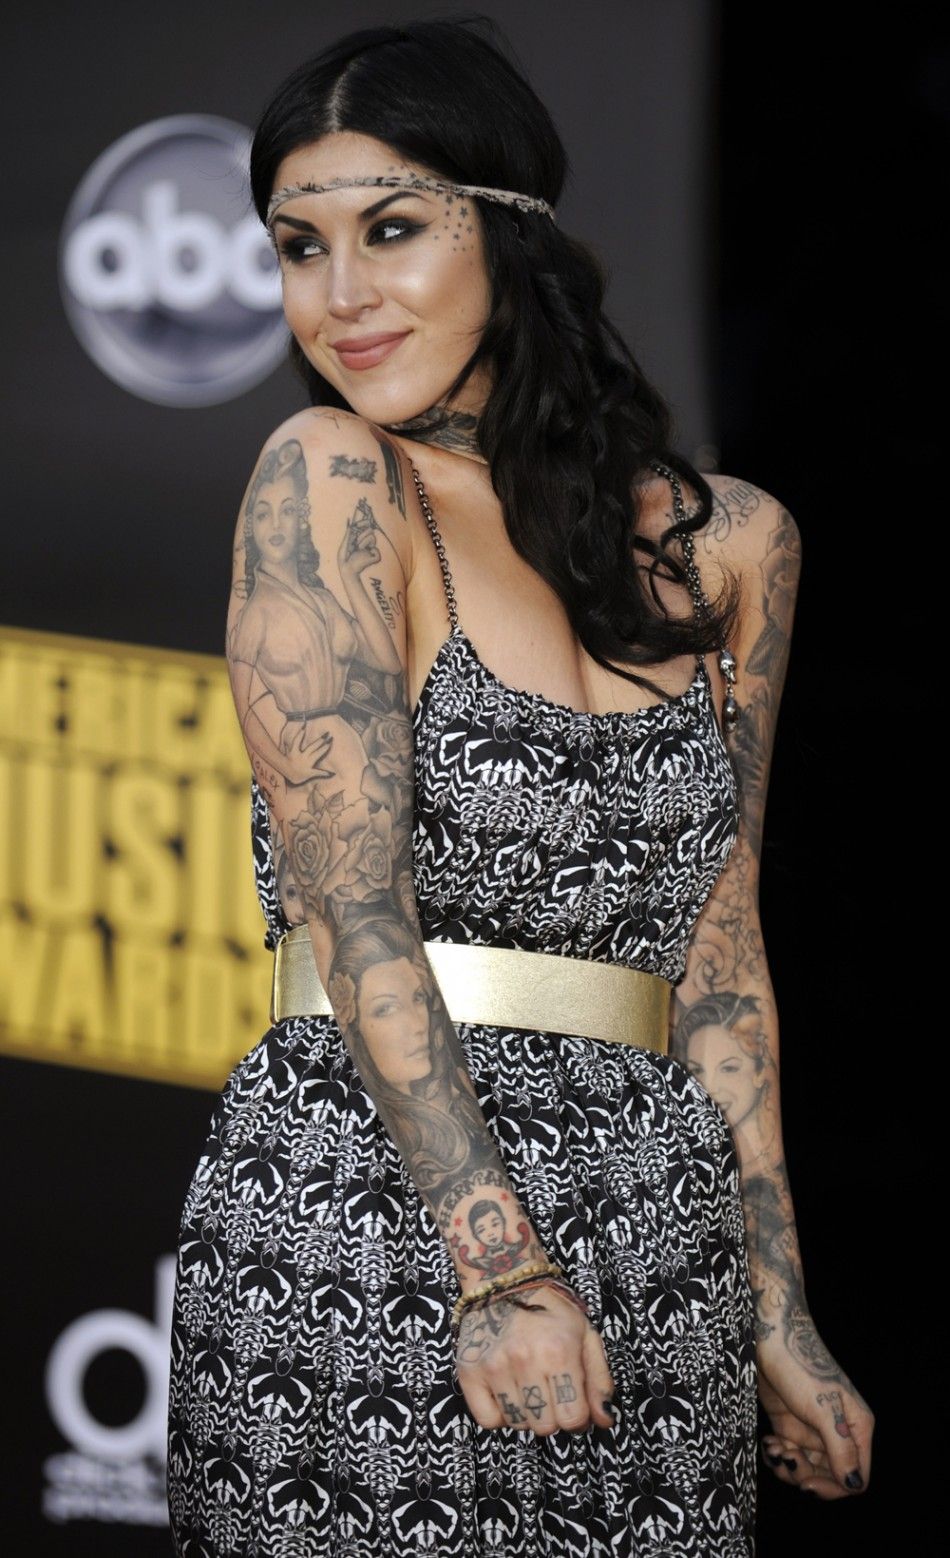 Photos from Jesse James & Kat Von D: Tattooed and Now Tattered